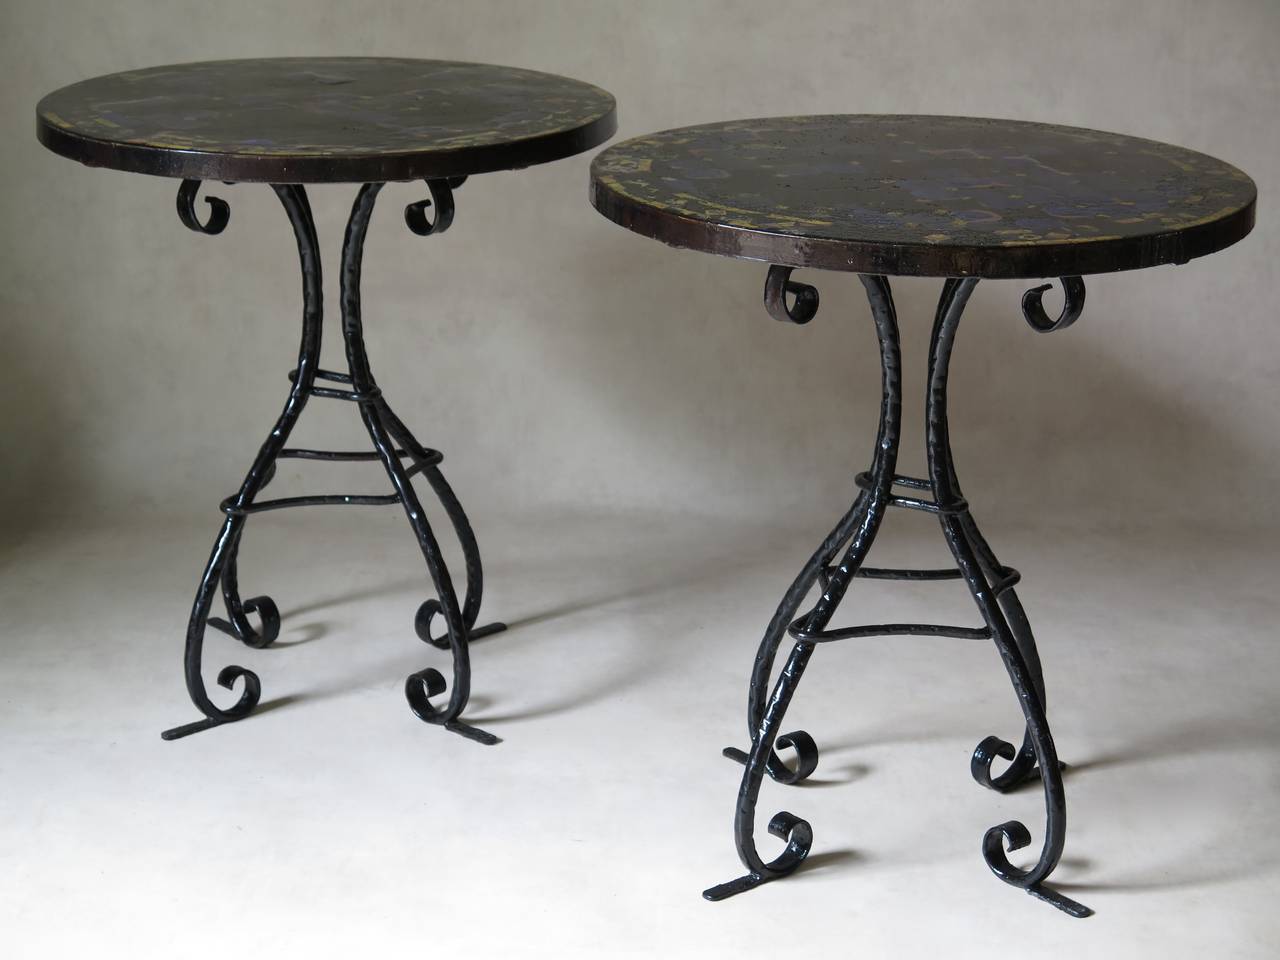 Very beautiful and rare pair of side tables with yellow and vivid blue mosaic tile tops and elegant sinuous wrought iron bases, with glossy blabk paint finish. Ironwork reminiscent of Gaudi's style.